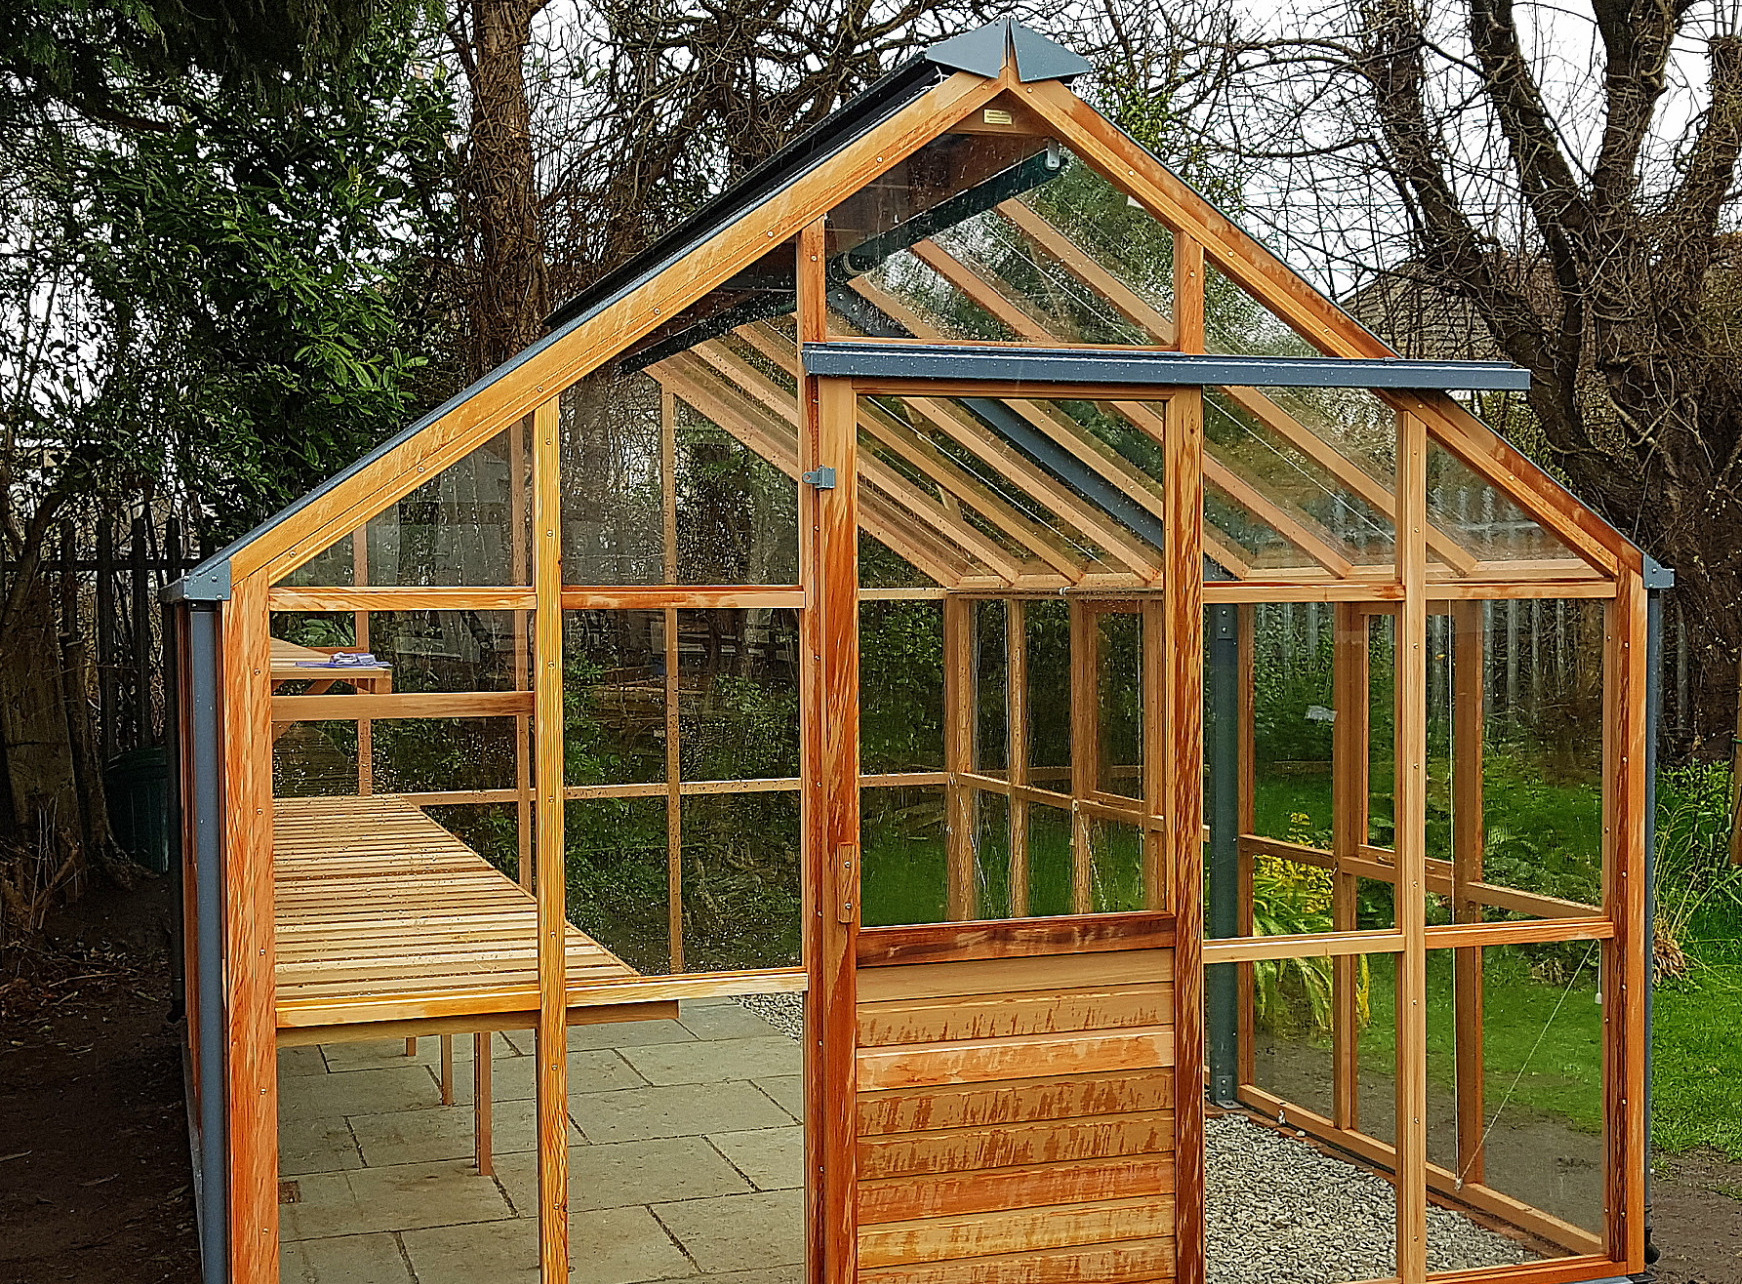 Gabriel Ash Classic 10 x 14 Greenhouse in Churchtown, Dublin 14 | the only timber greenhouses endorsed by the RHS | Owen Chubb  087-2306128